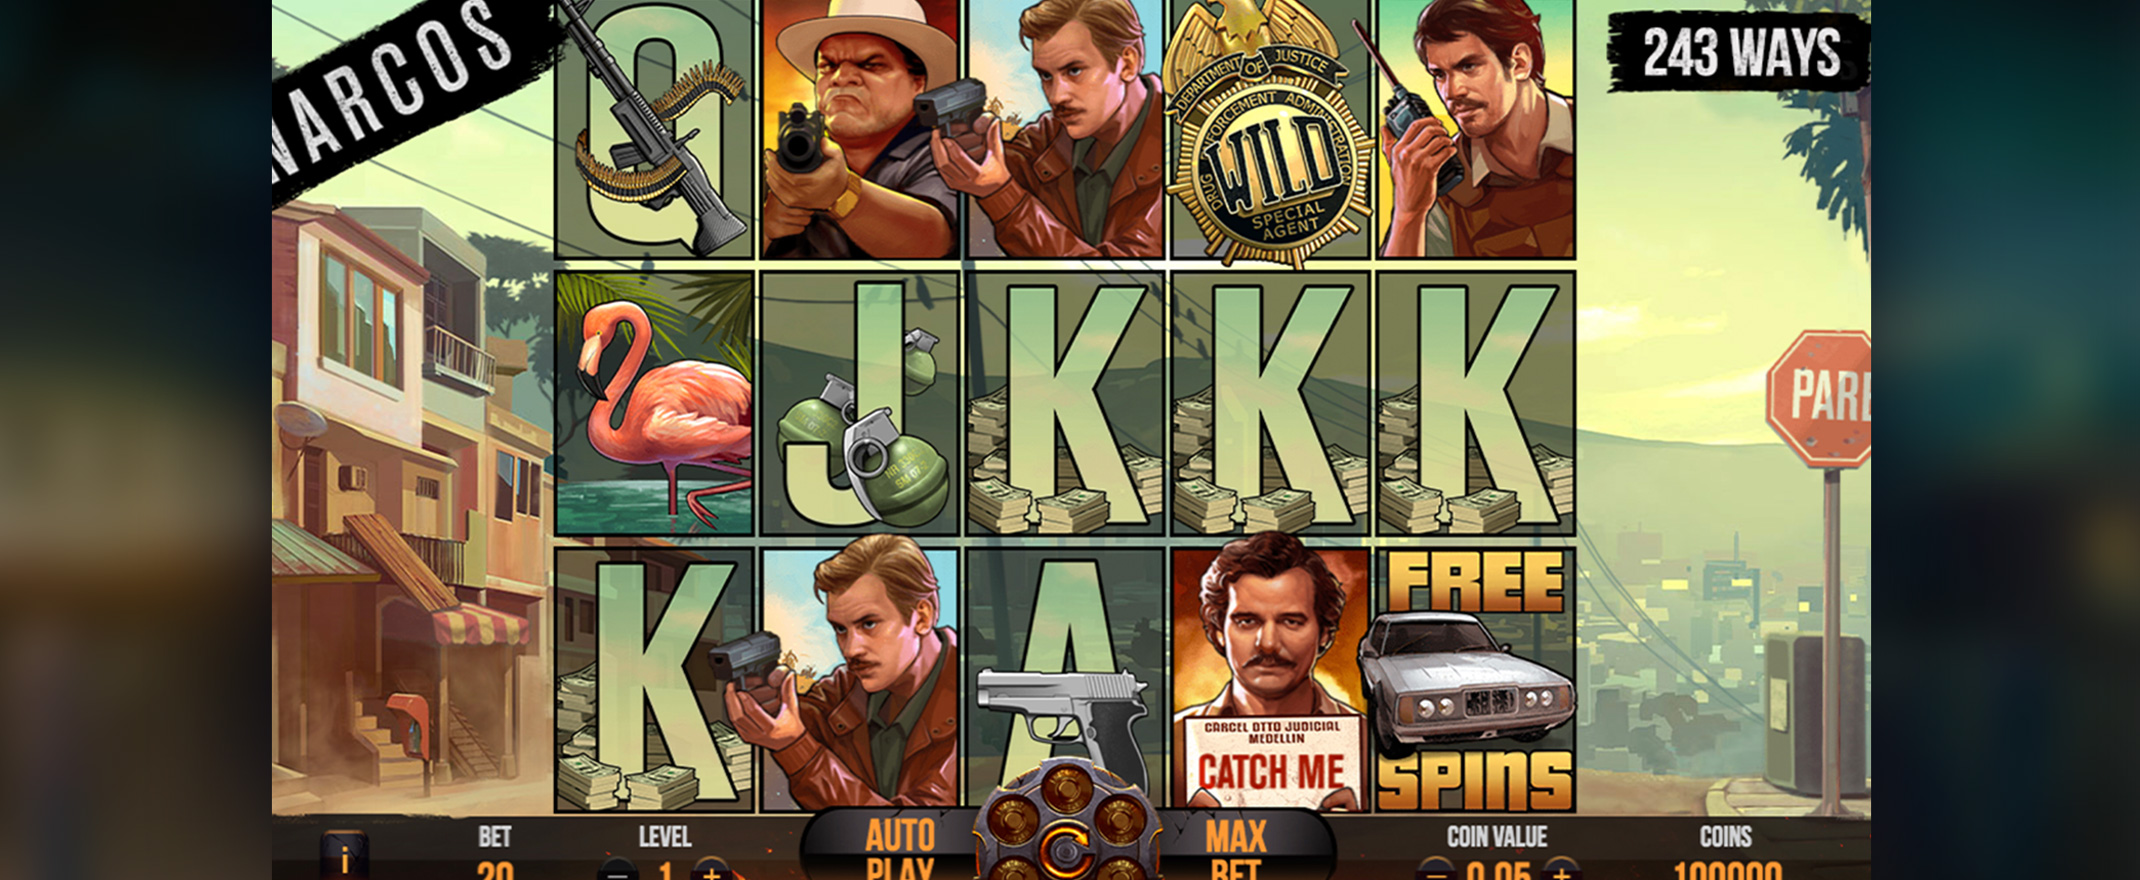 Narcos video slot from NetEnt